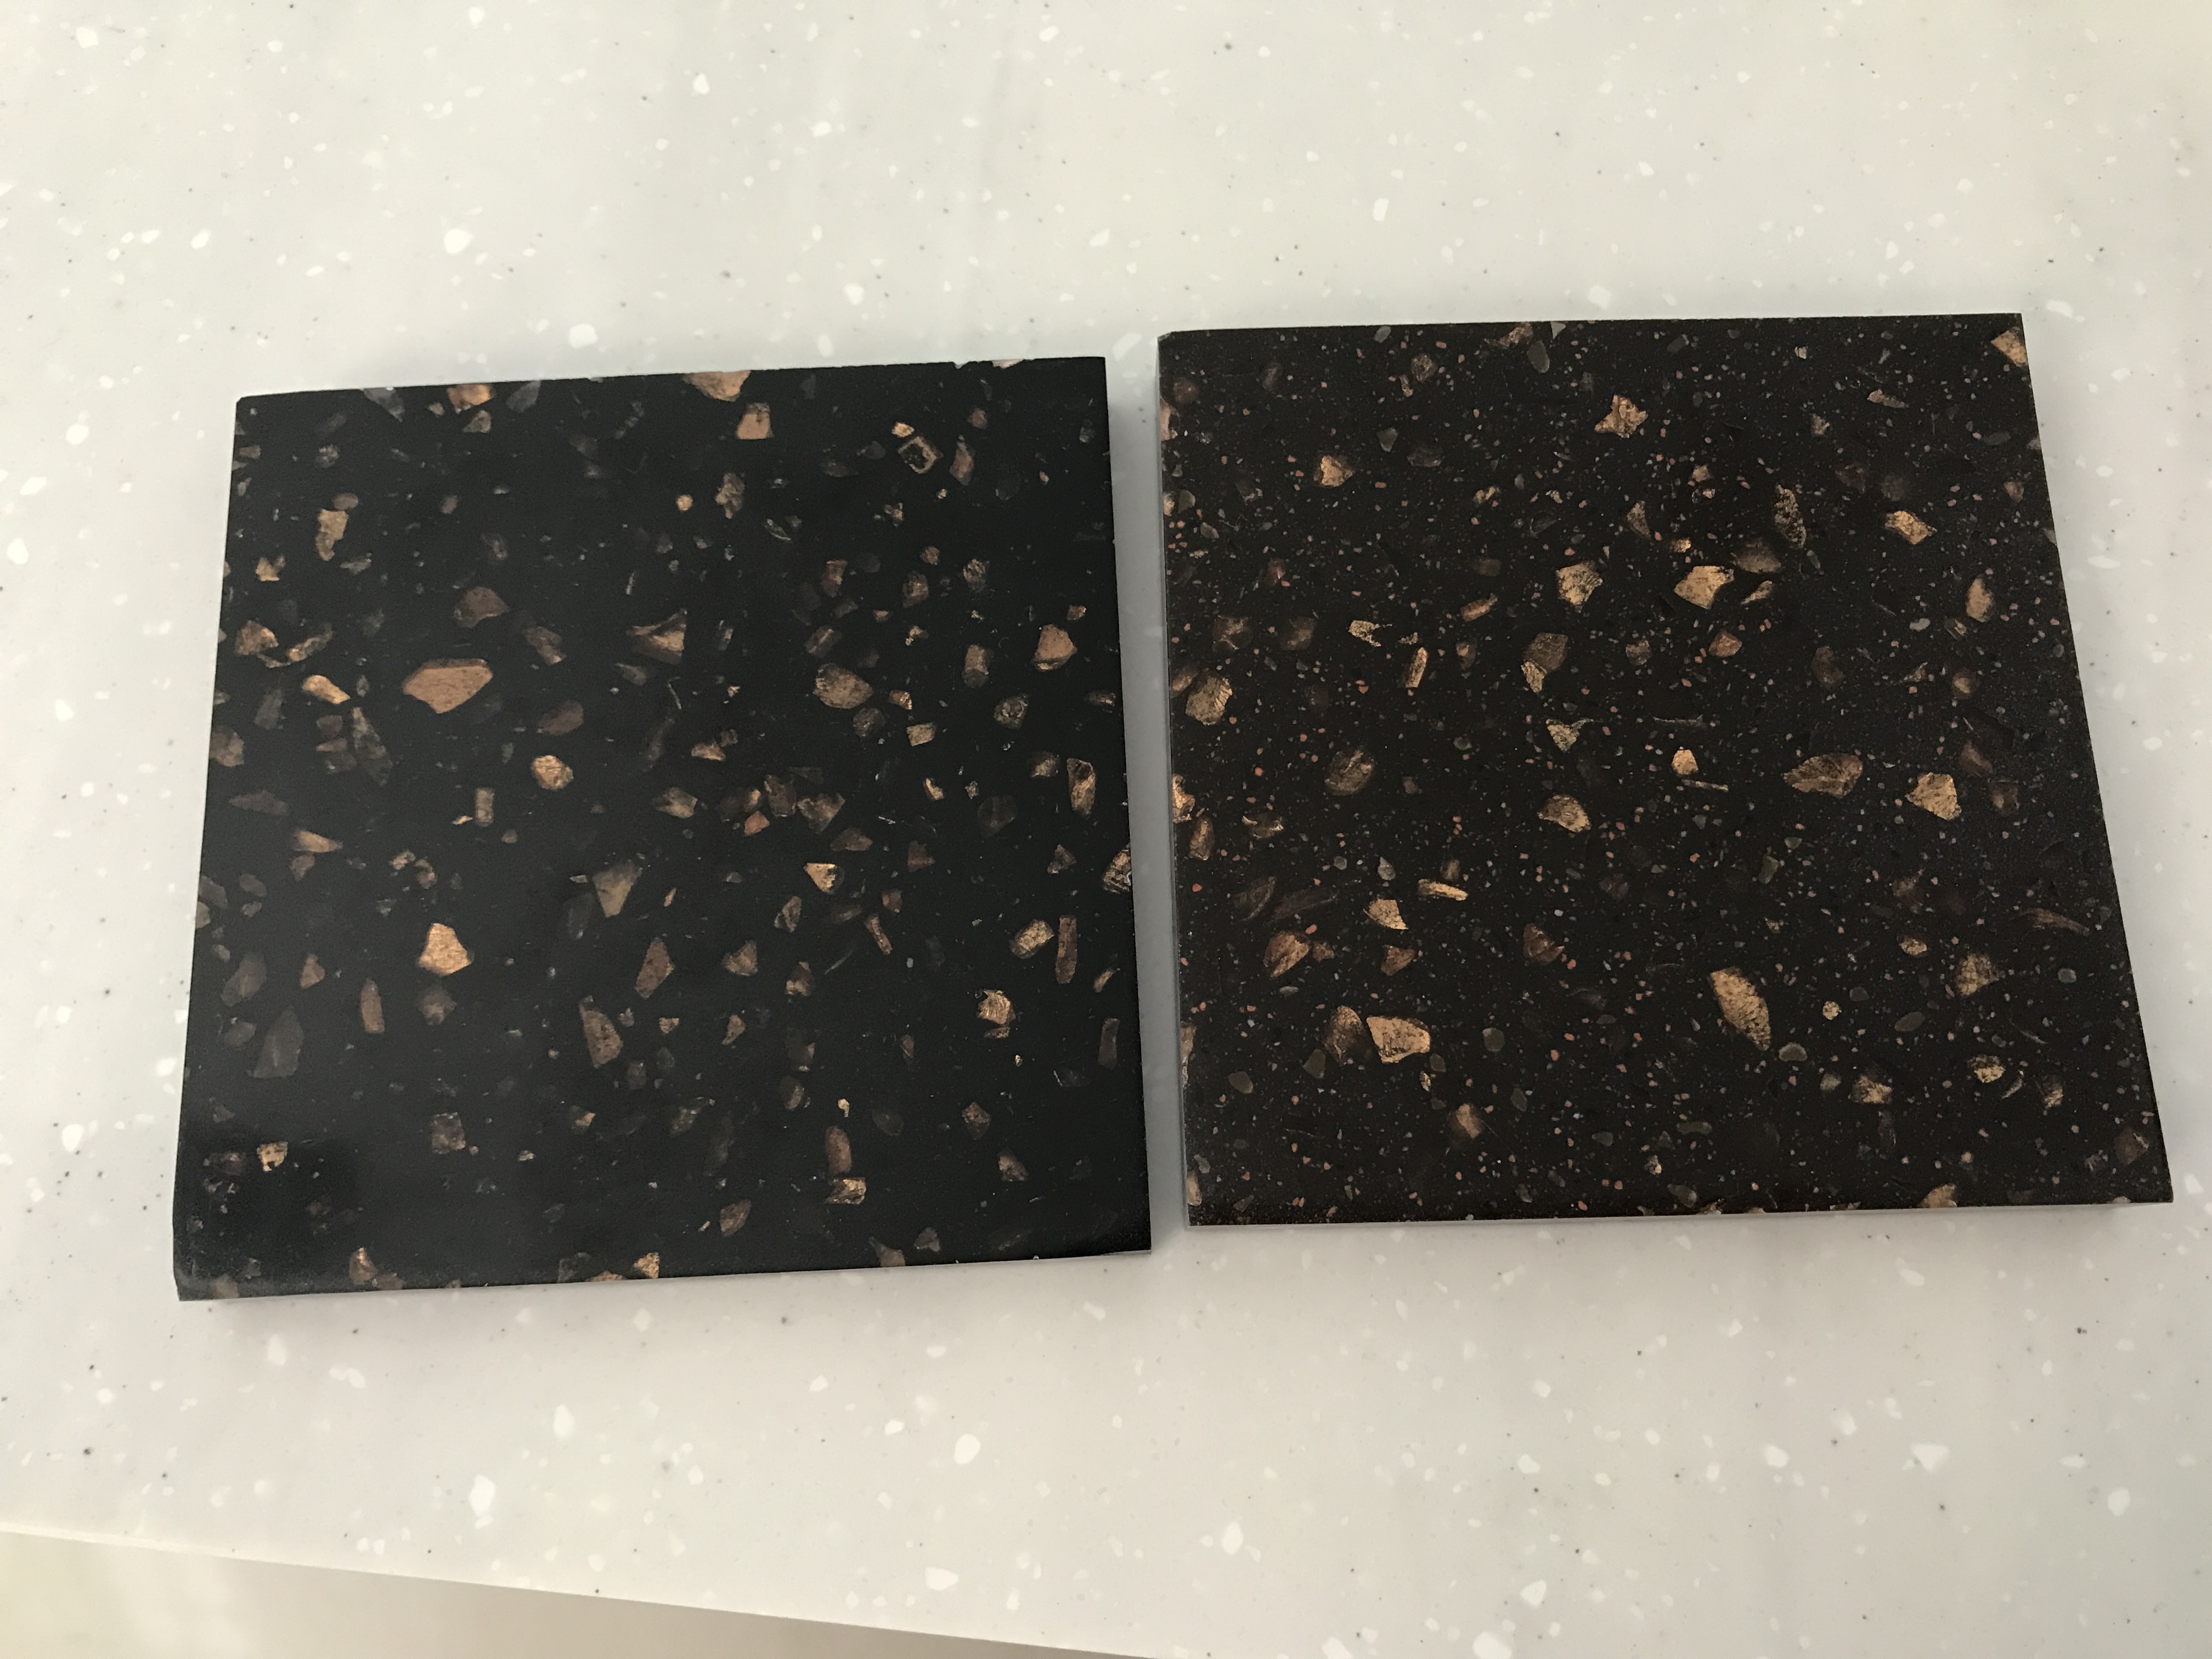 Artificial Sheet Price Stone Corians Big Slab Acrylic Solid Surface Solid Surface Top Countertops